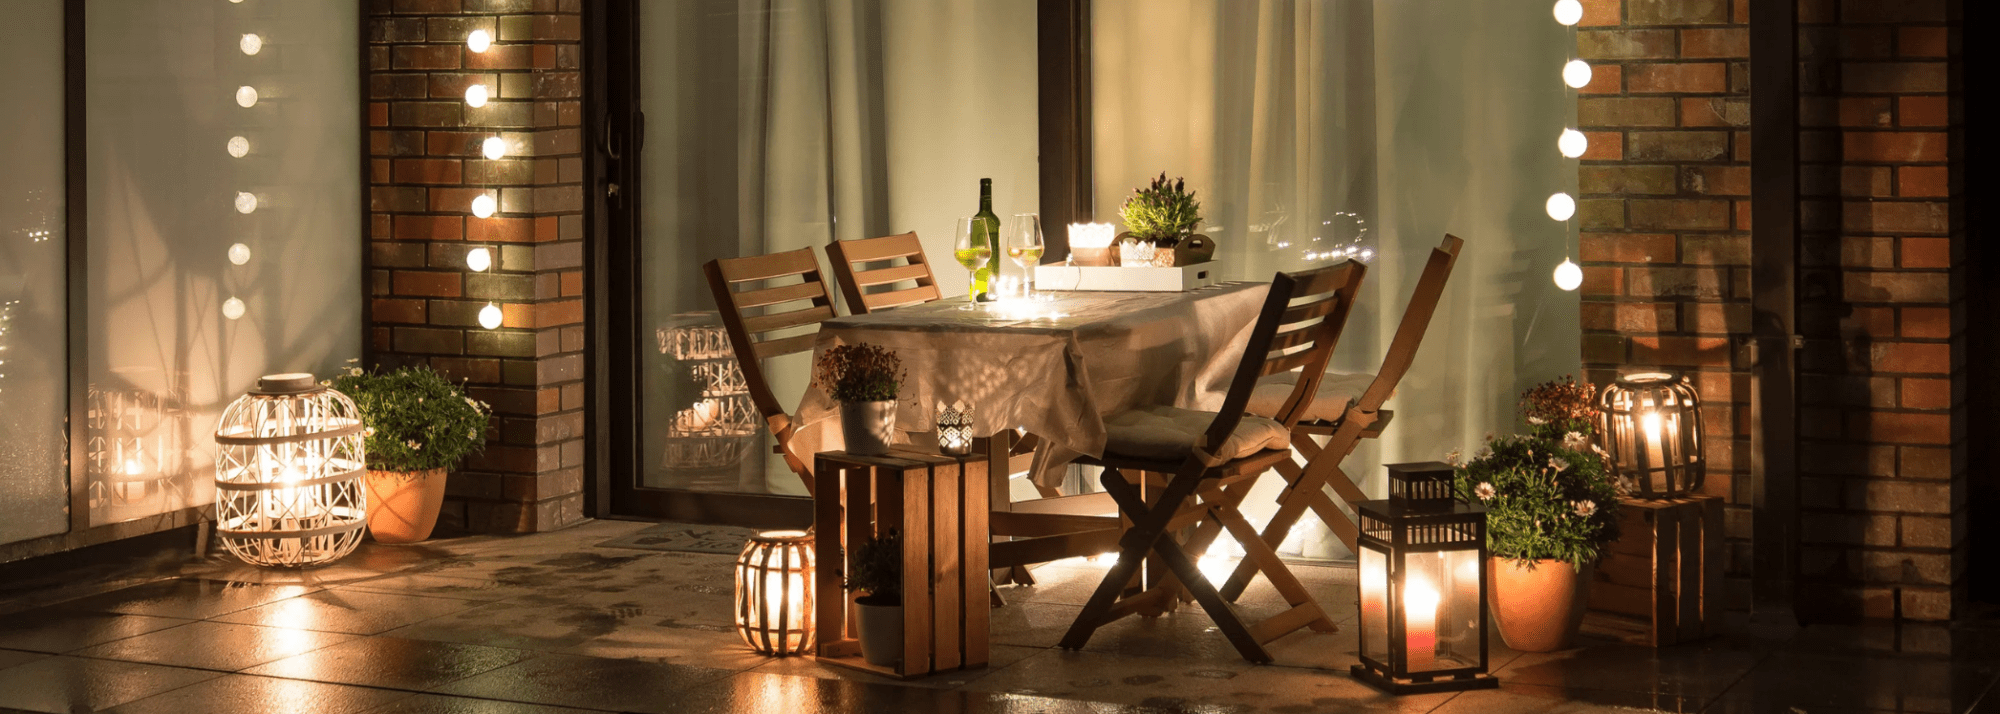 Terrace patio with chairs, a table and fairy lights